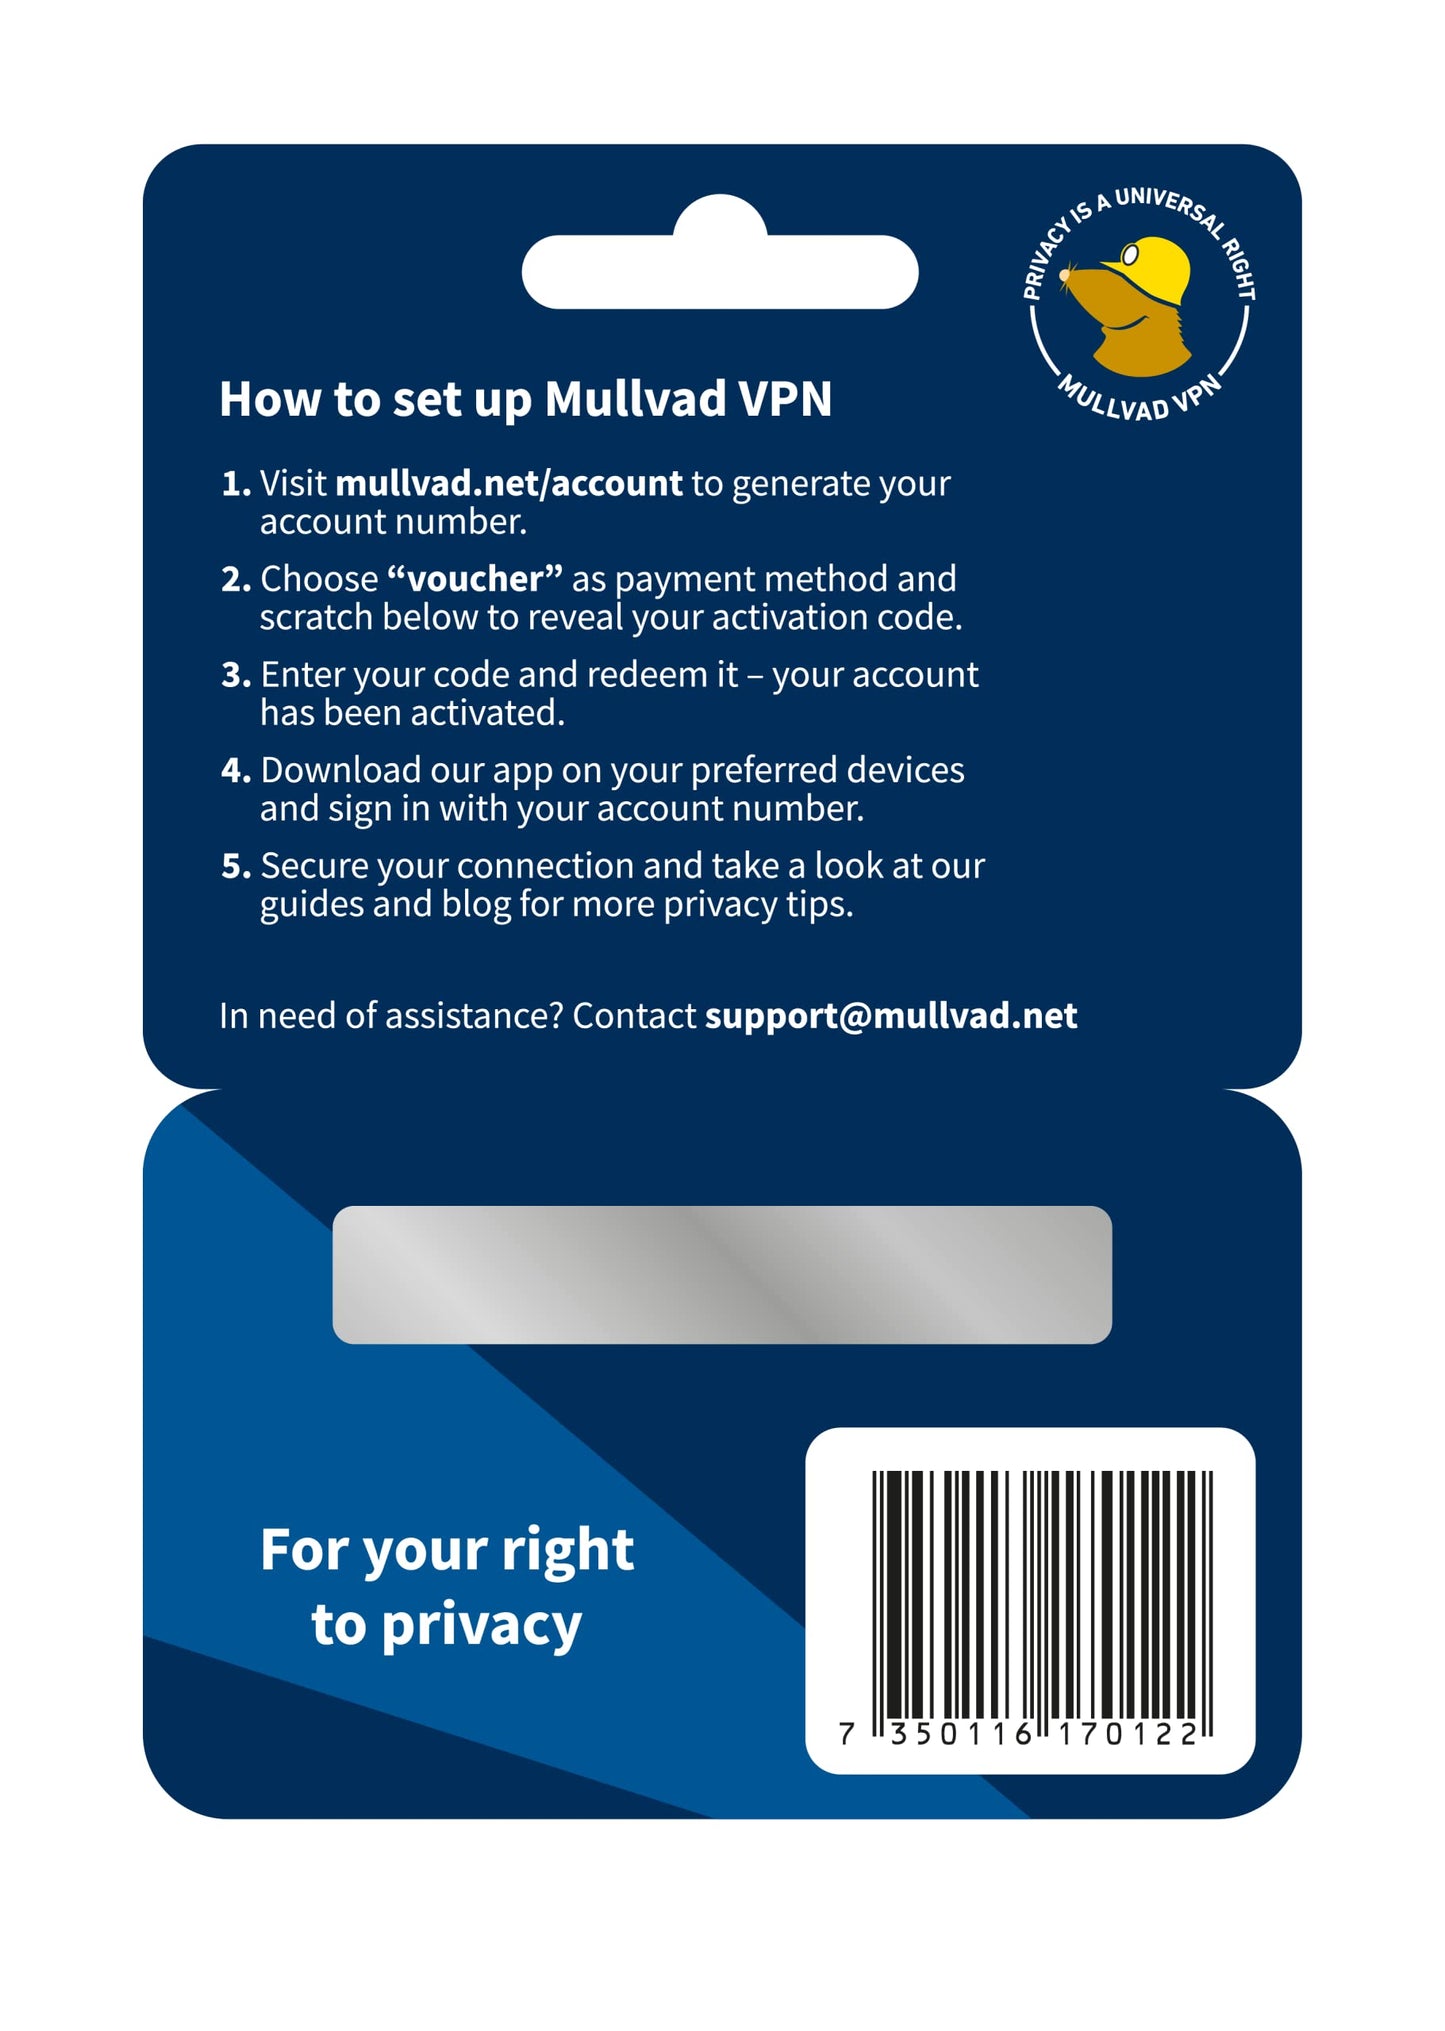 Mullvad VPN | 12 Months for 5 Devices | Protect Your Privacy with Easy-To-Use Security VPN Service